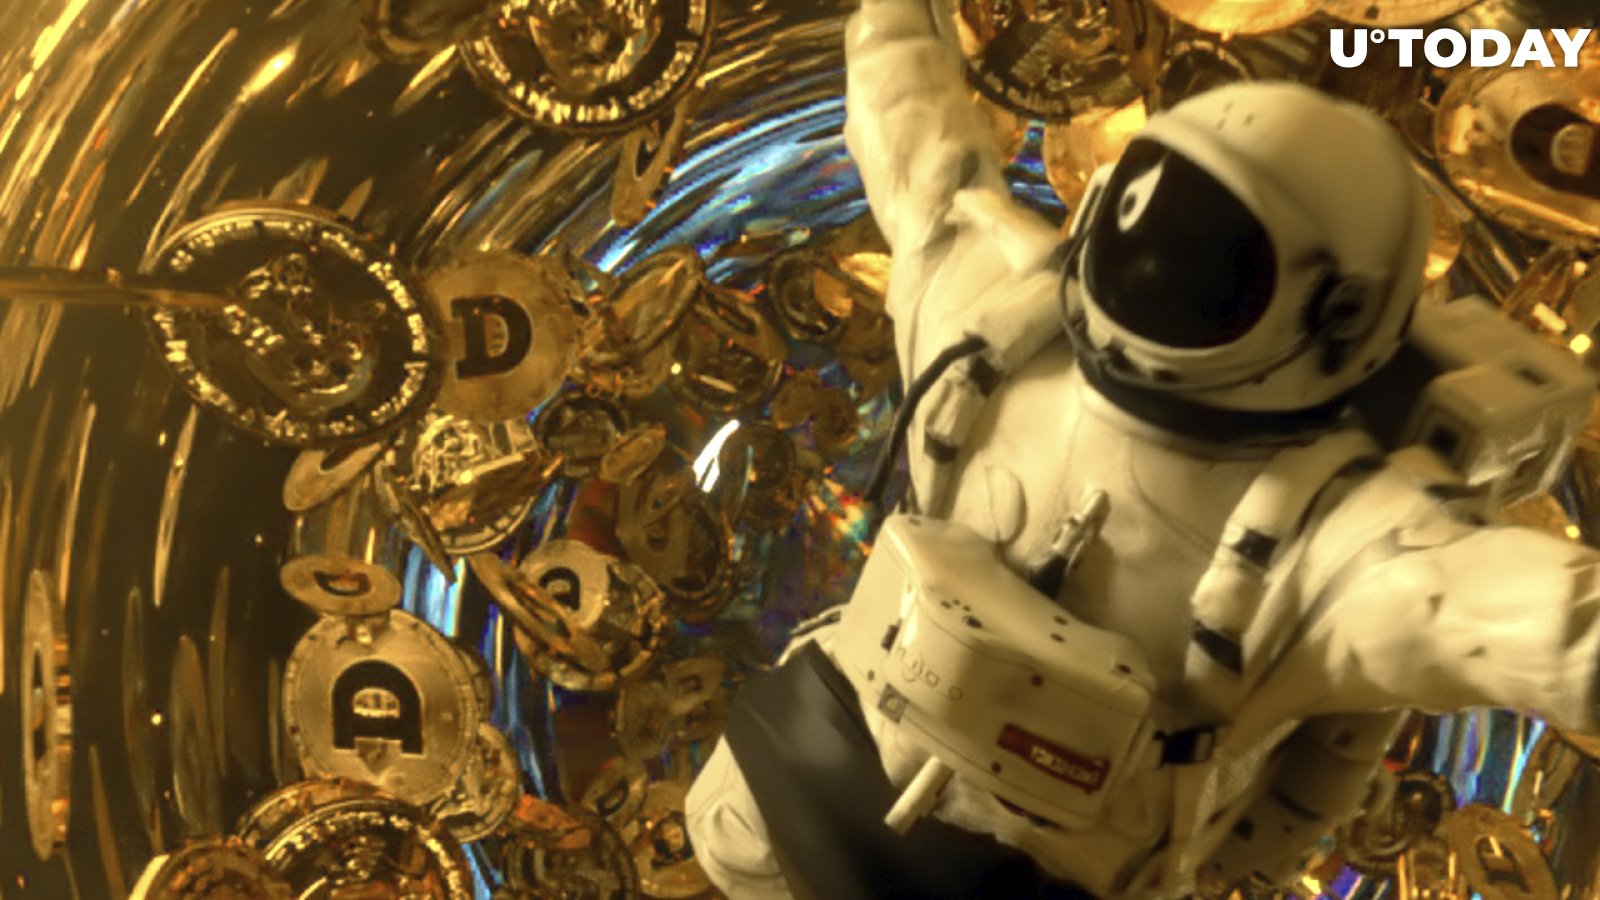 DOGE Price Soars as Elon Musk Features Dogecoin Using Drones During "Cyber Rodeo" Event